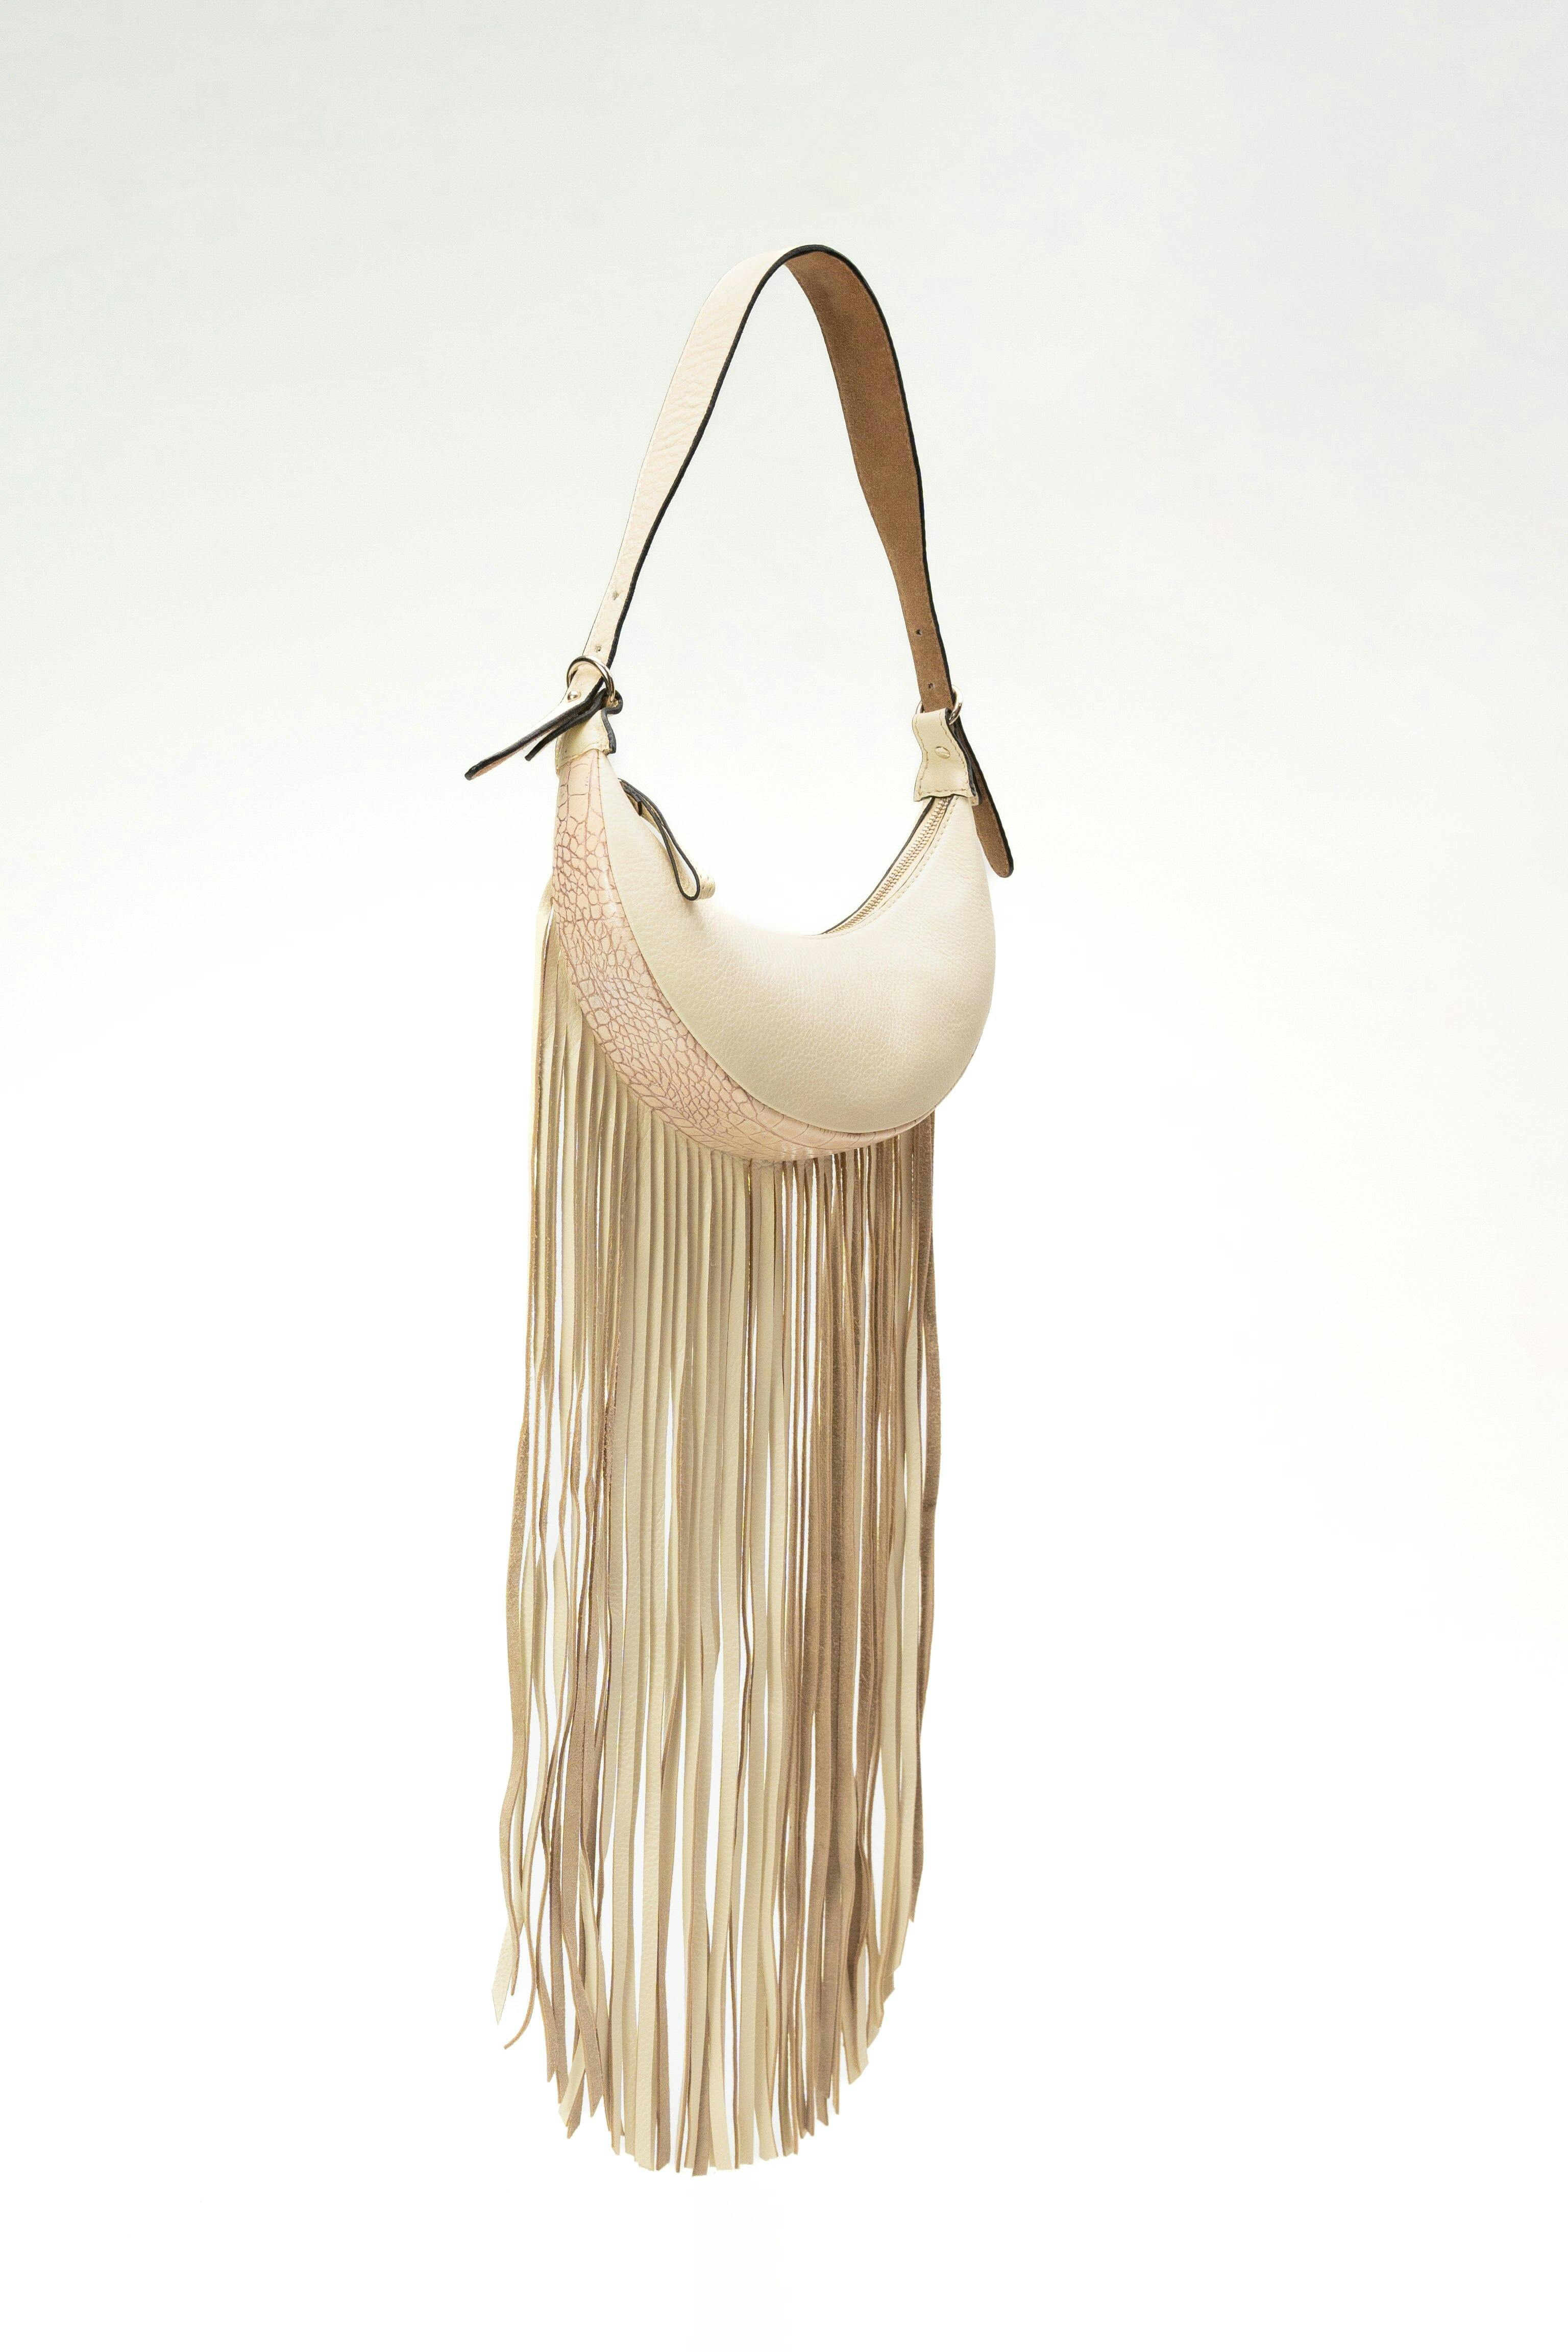 Selena Fringe in Ivory, a product by Mistry 